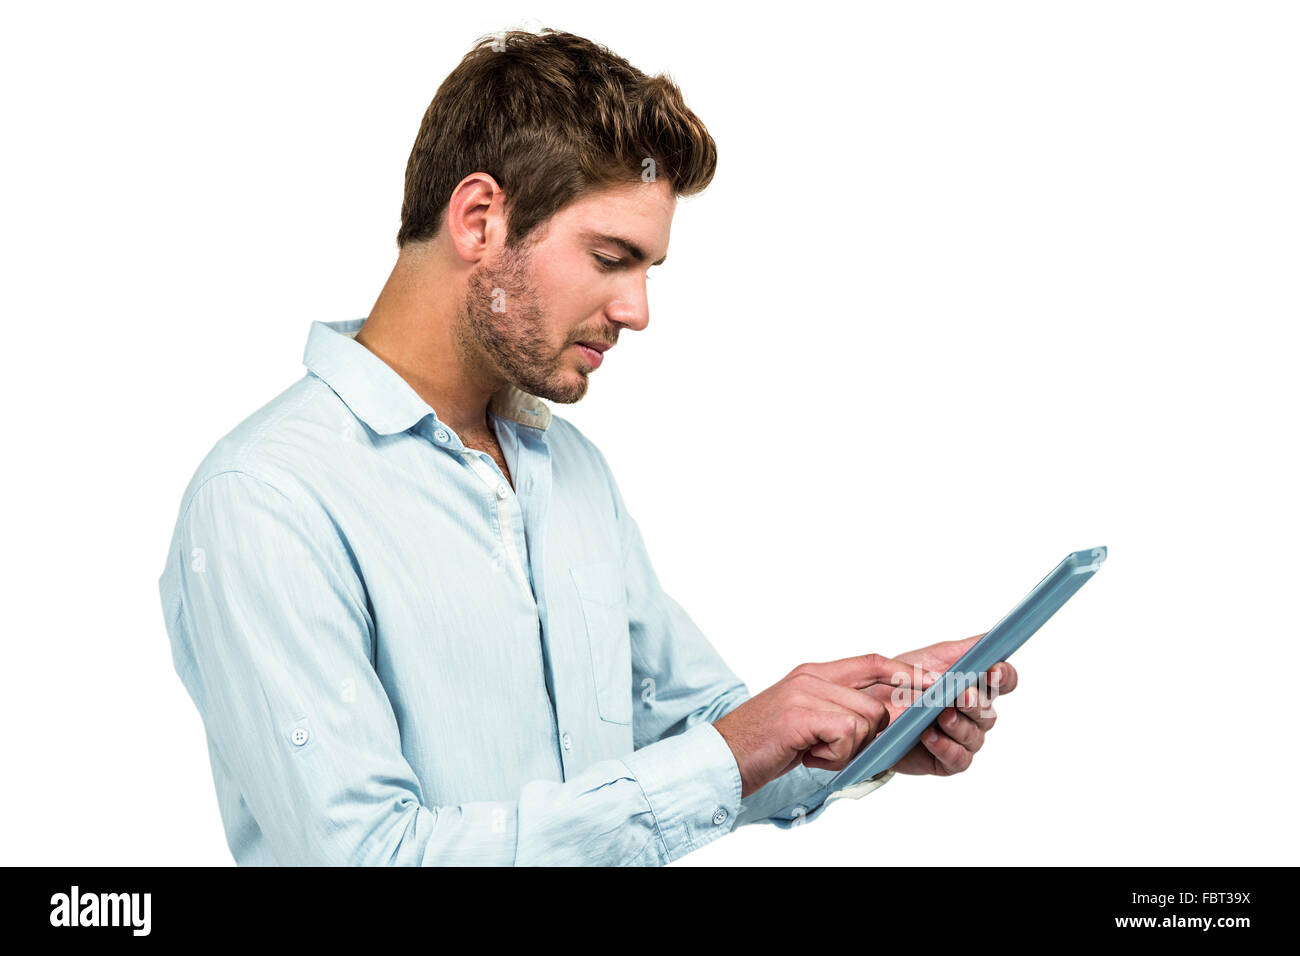 Handsome man using tablet Stock Photo